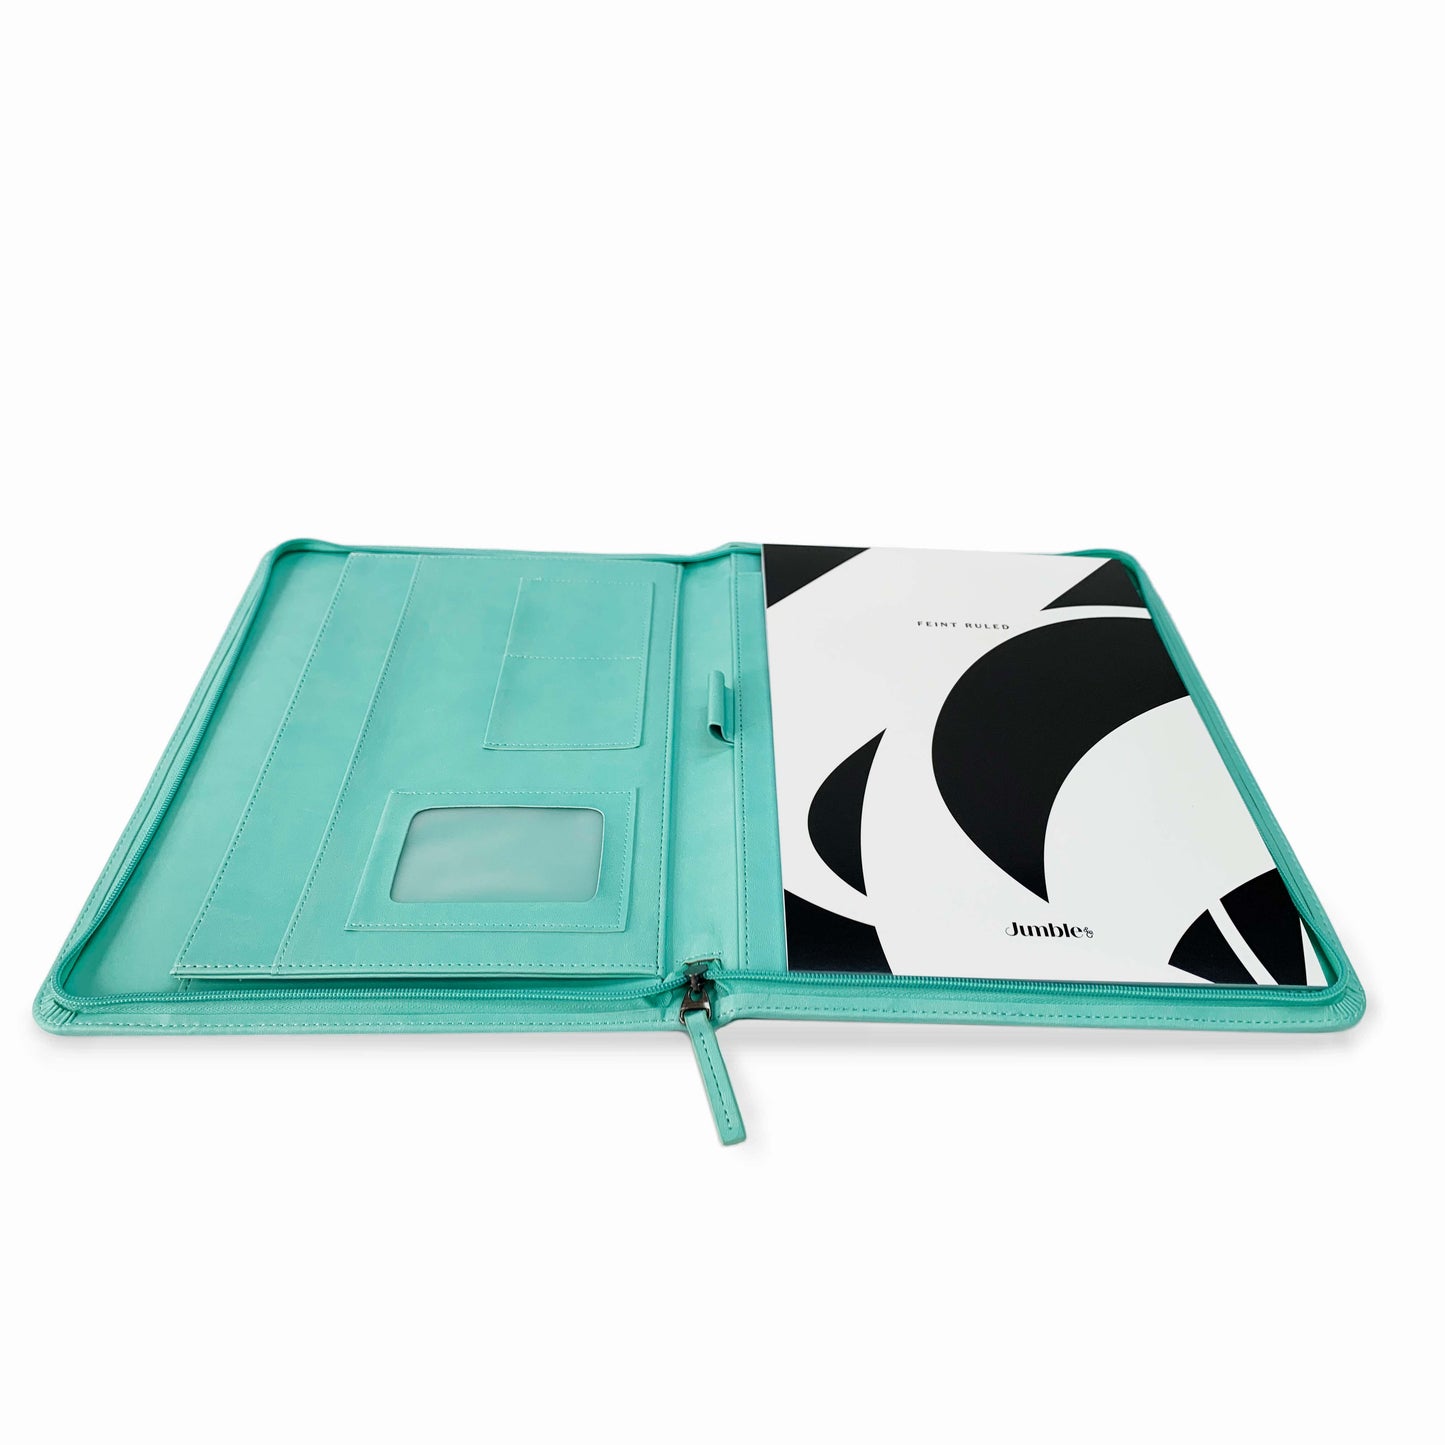 Intentus Organiser A4 PU Leather-Like Folder with Ruled Refill Pad - Sour Grape Teal